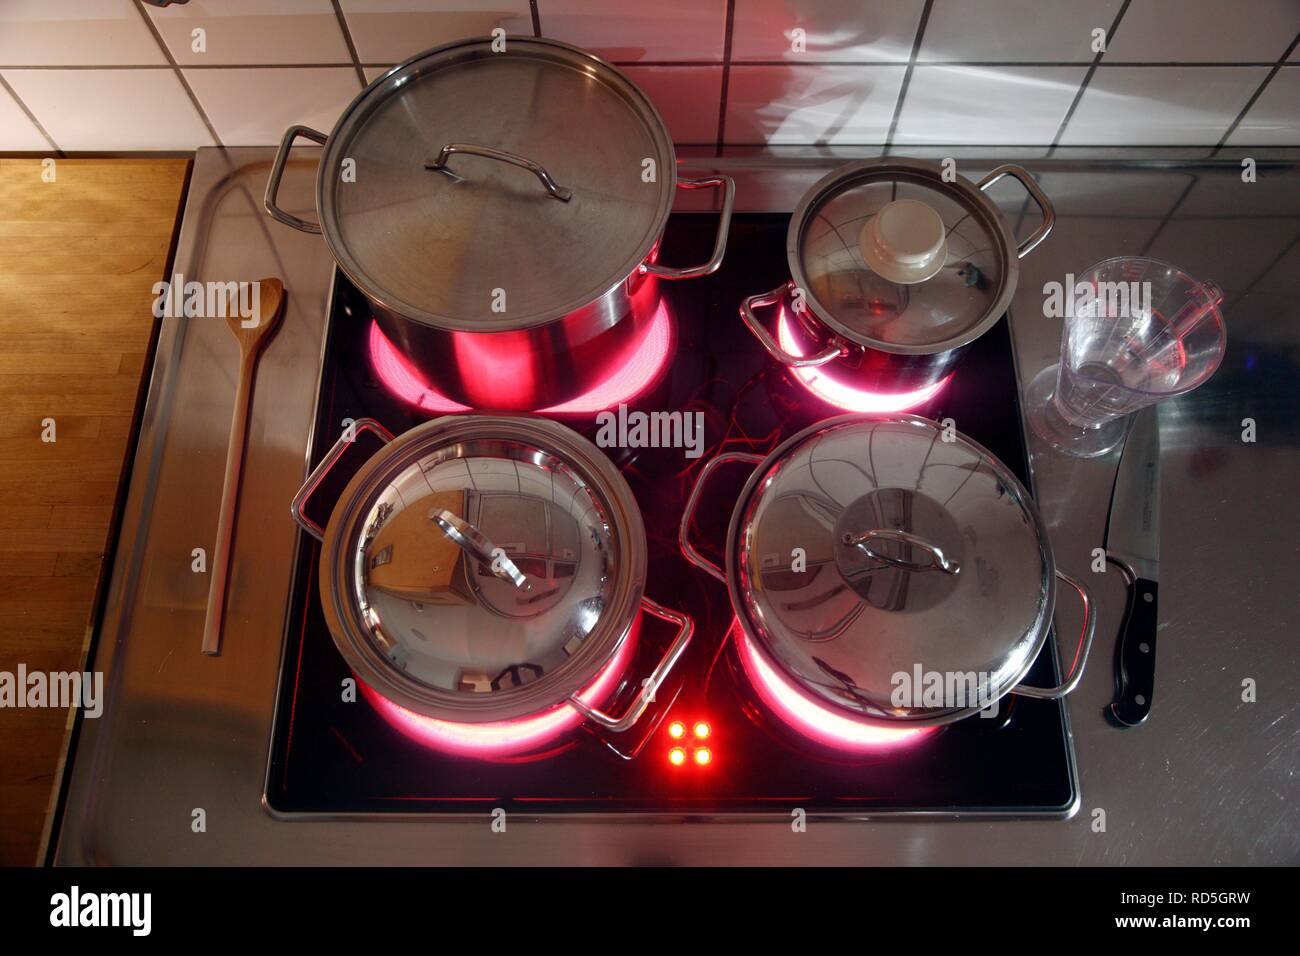 Stainless steel cooking pots on an electric stove with glass-ceramic cooktop Stock Photo